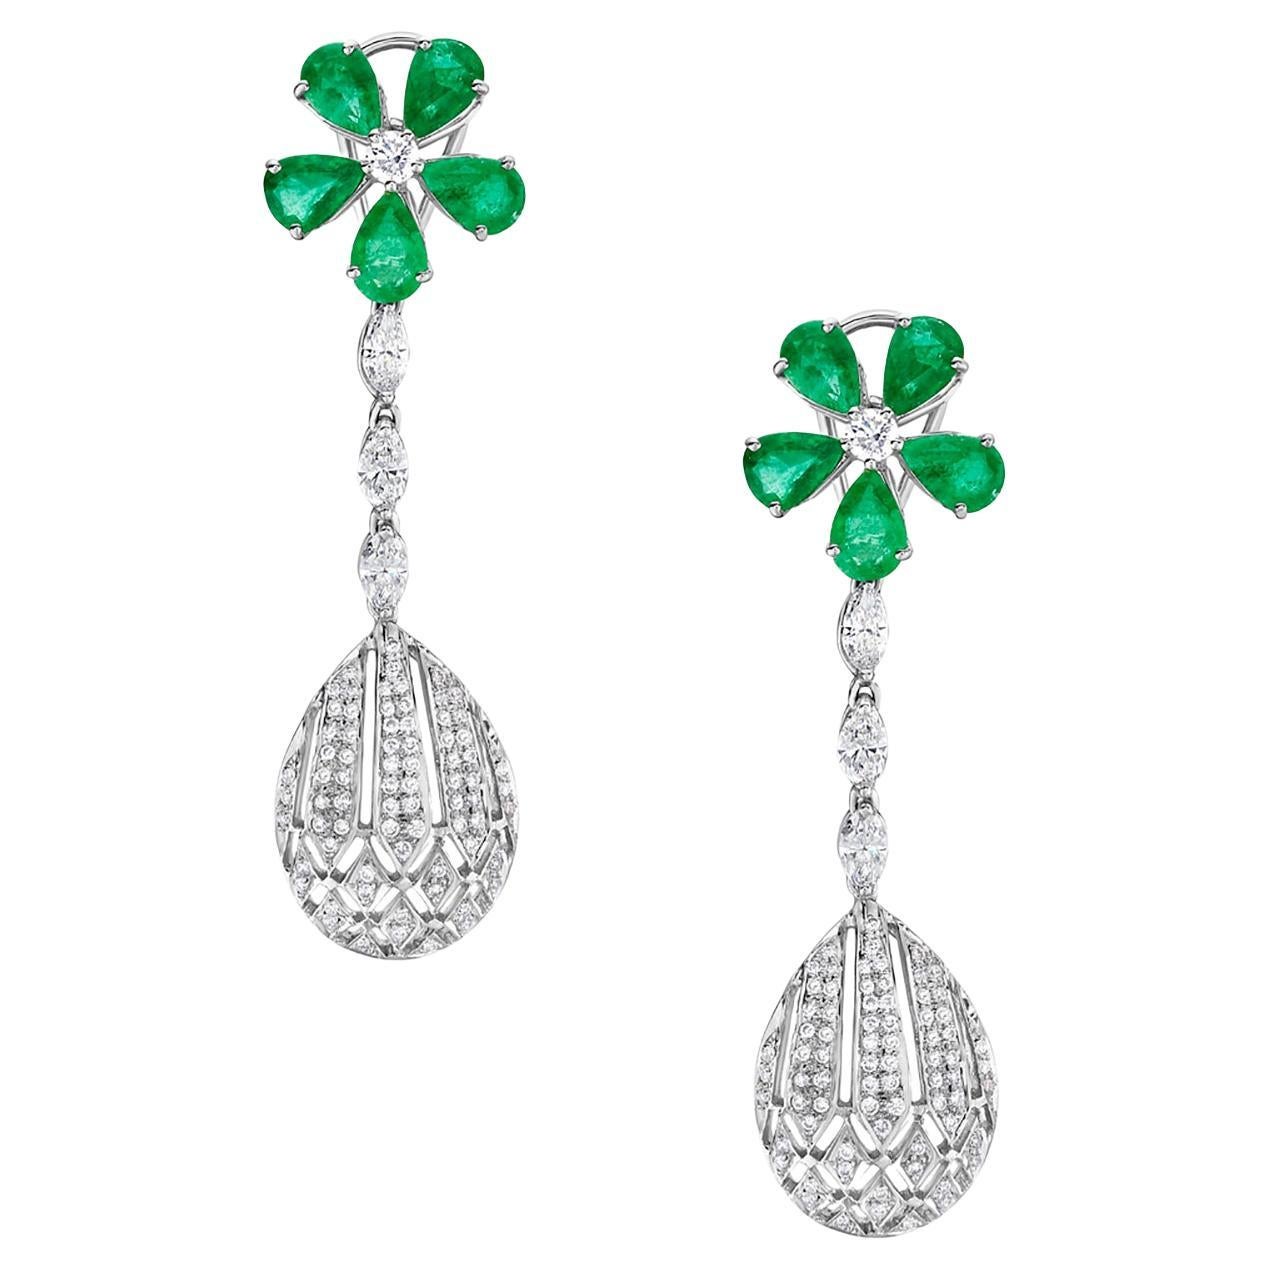 Pear Shaped Emerald Earring Set in Flower Shape with Pave Diamonds in White Gold